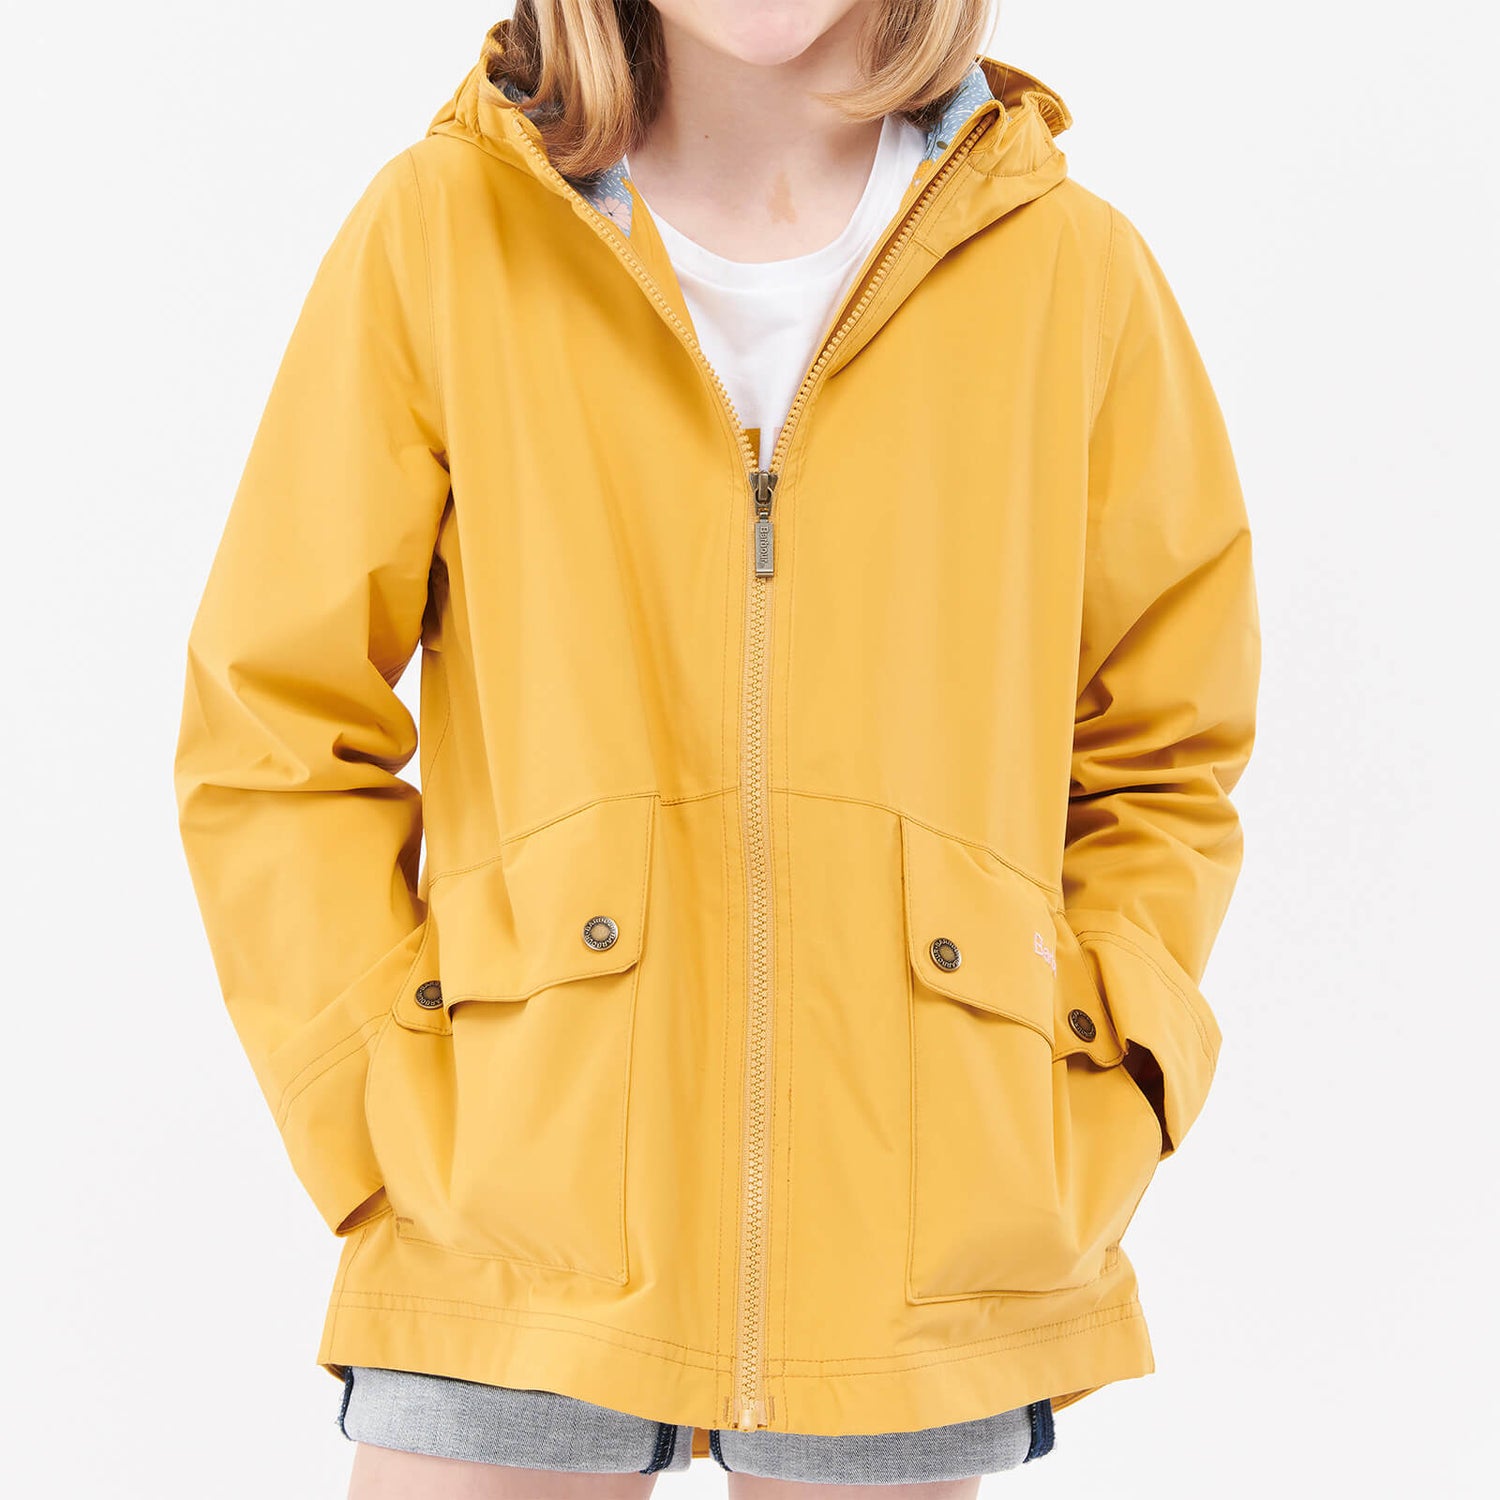 Barbour Girls' Armeria Jacket - Mustard/Folky Floral -  10-11 Years